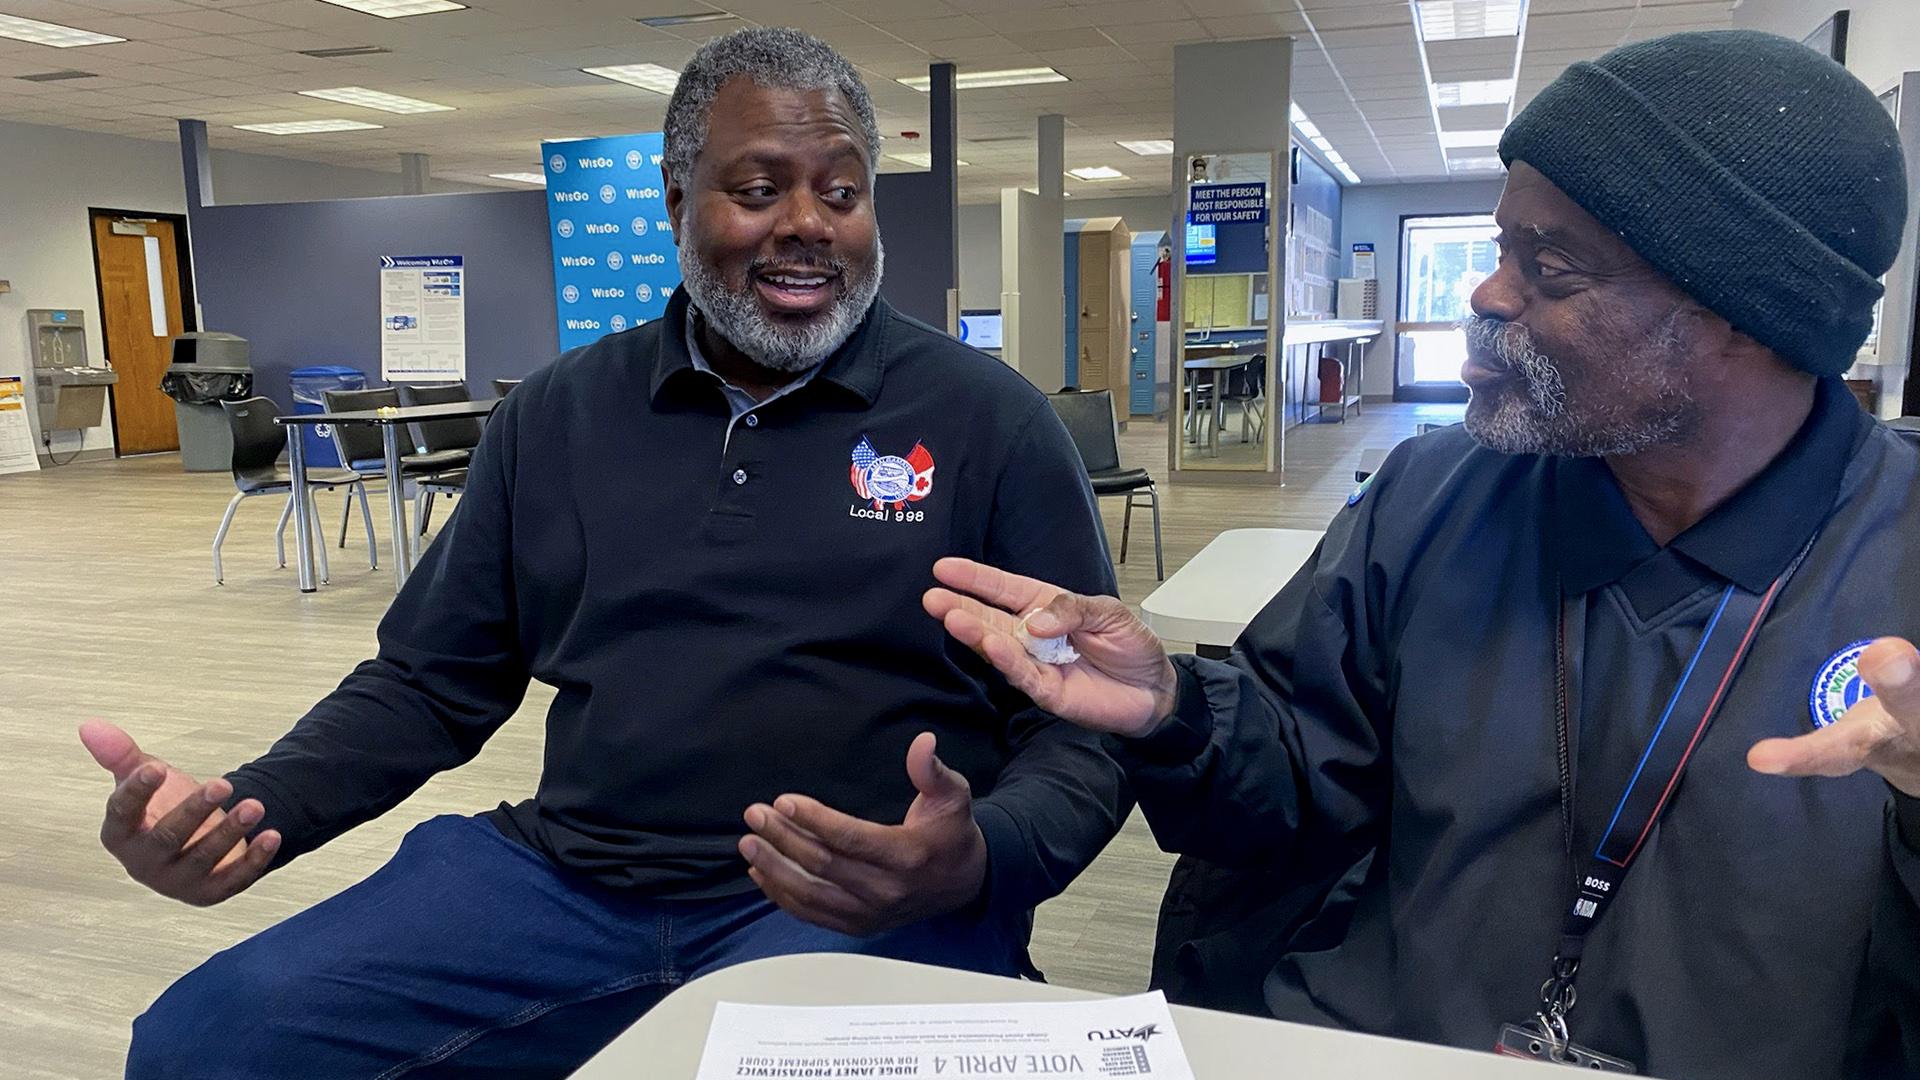 Donnell Shorter sits at the corner of a folding table and gestures with both hands while speaking to a man seated to his side and is also gesturing with both hands, in a room with more tables, cubicle dividers and lockers in the background.